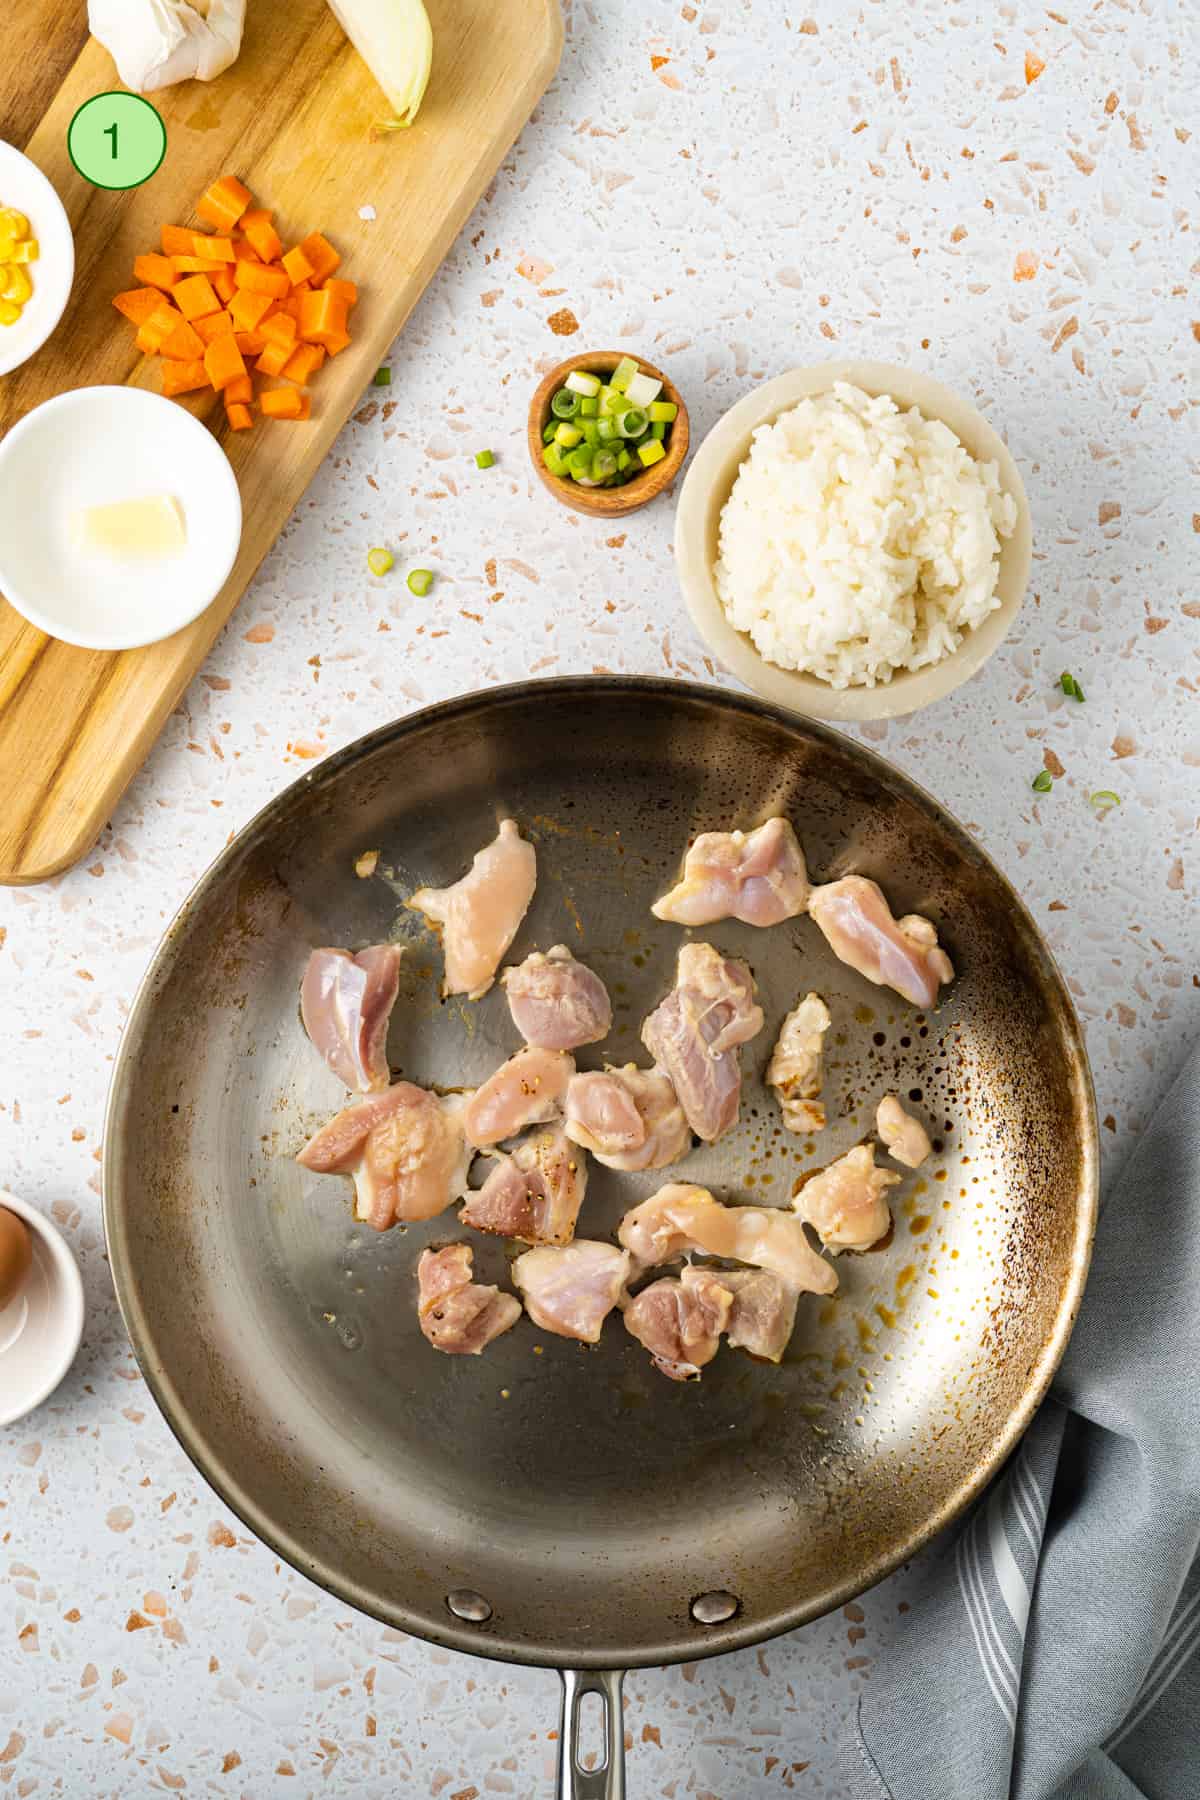 Cook the chicken in a skillet.